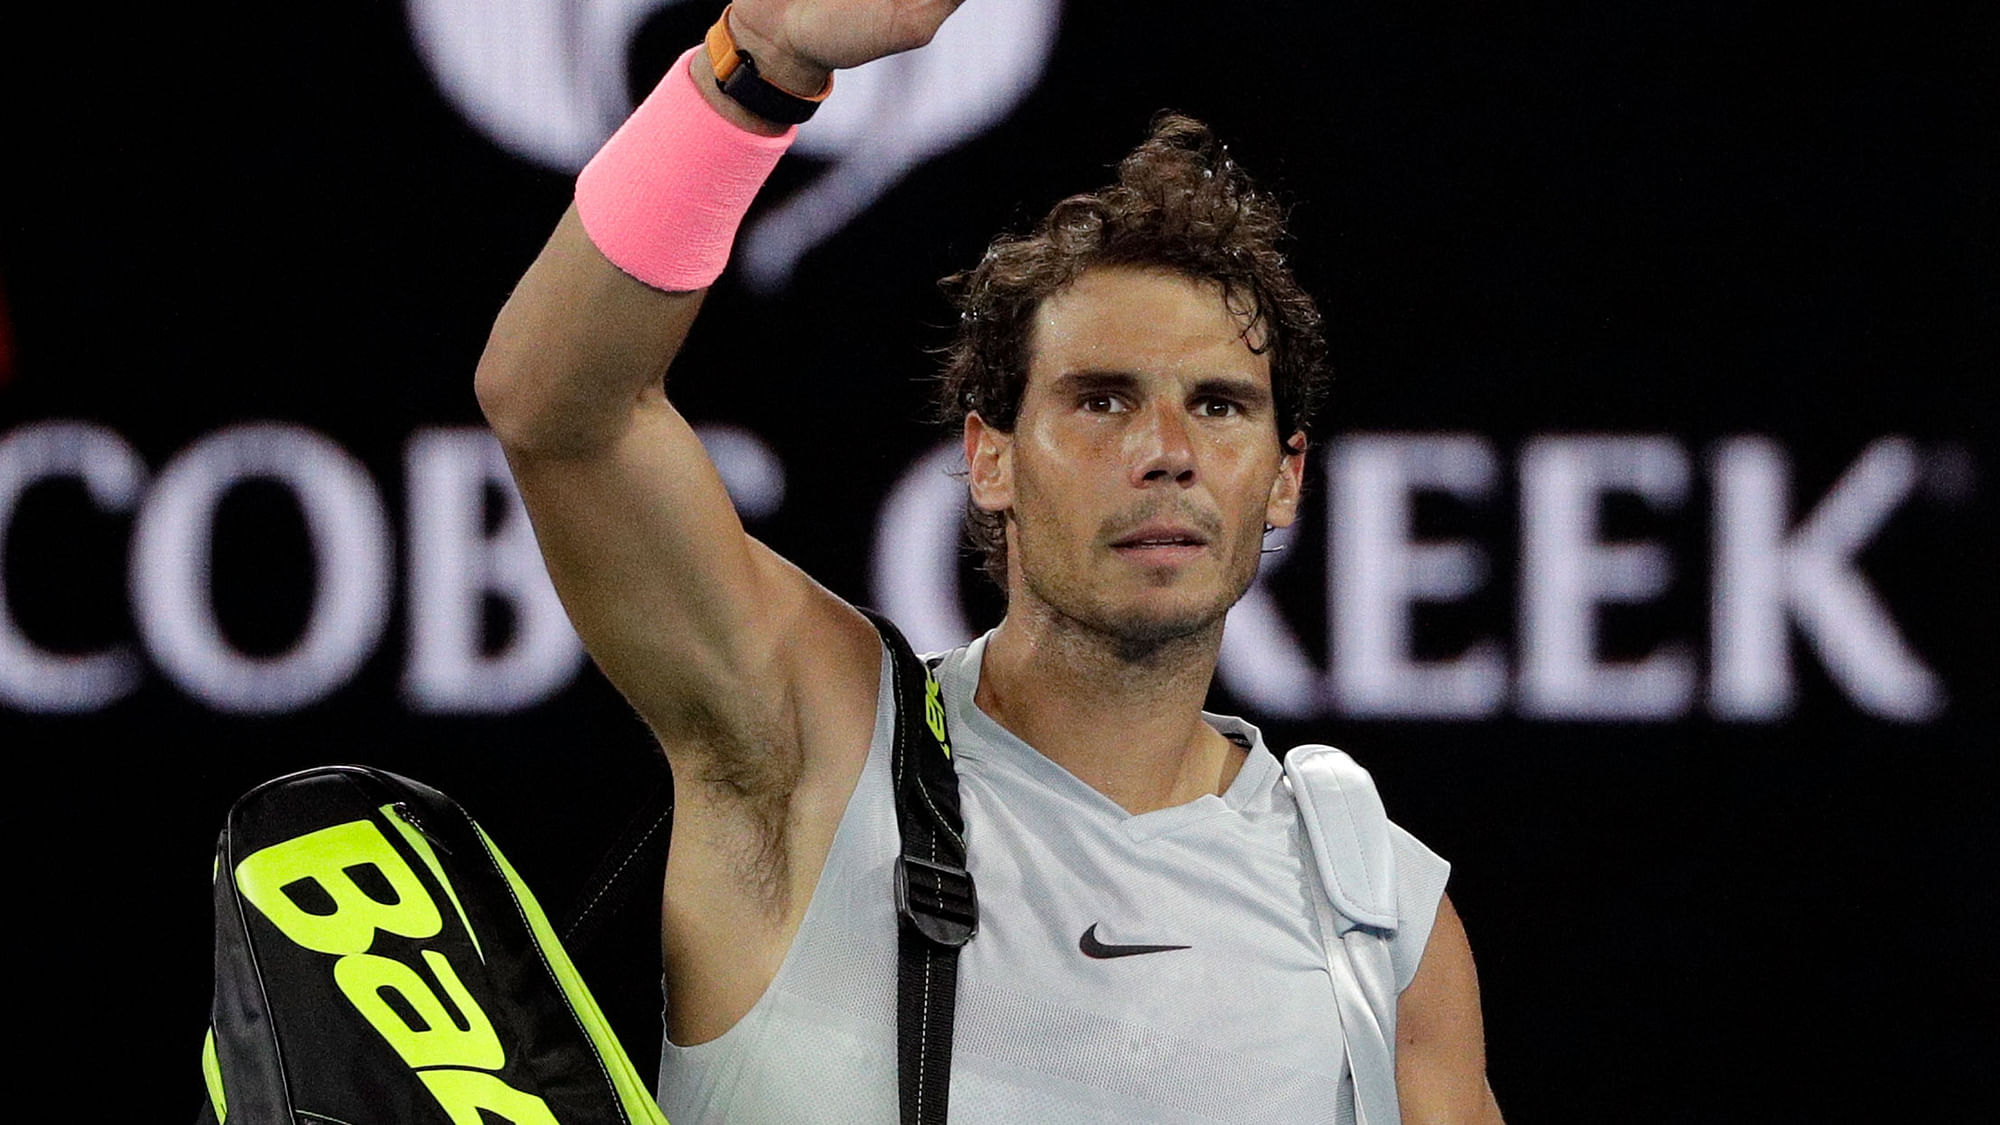 Rafael Nadal waves to the crowd after retiring hurt in the quarter-final match against Marin Cilic.